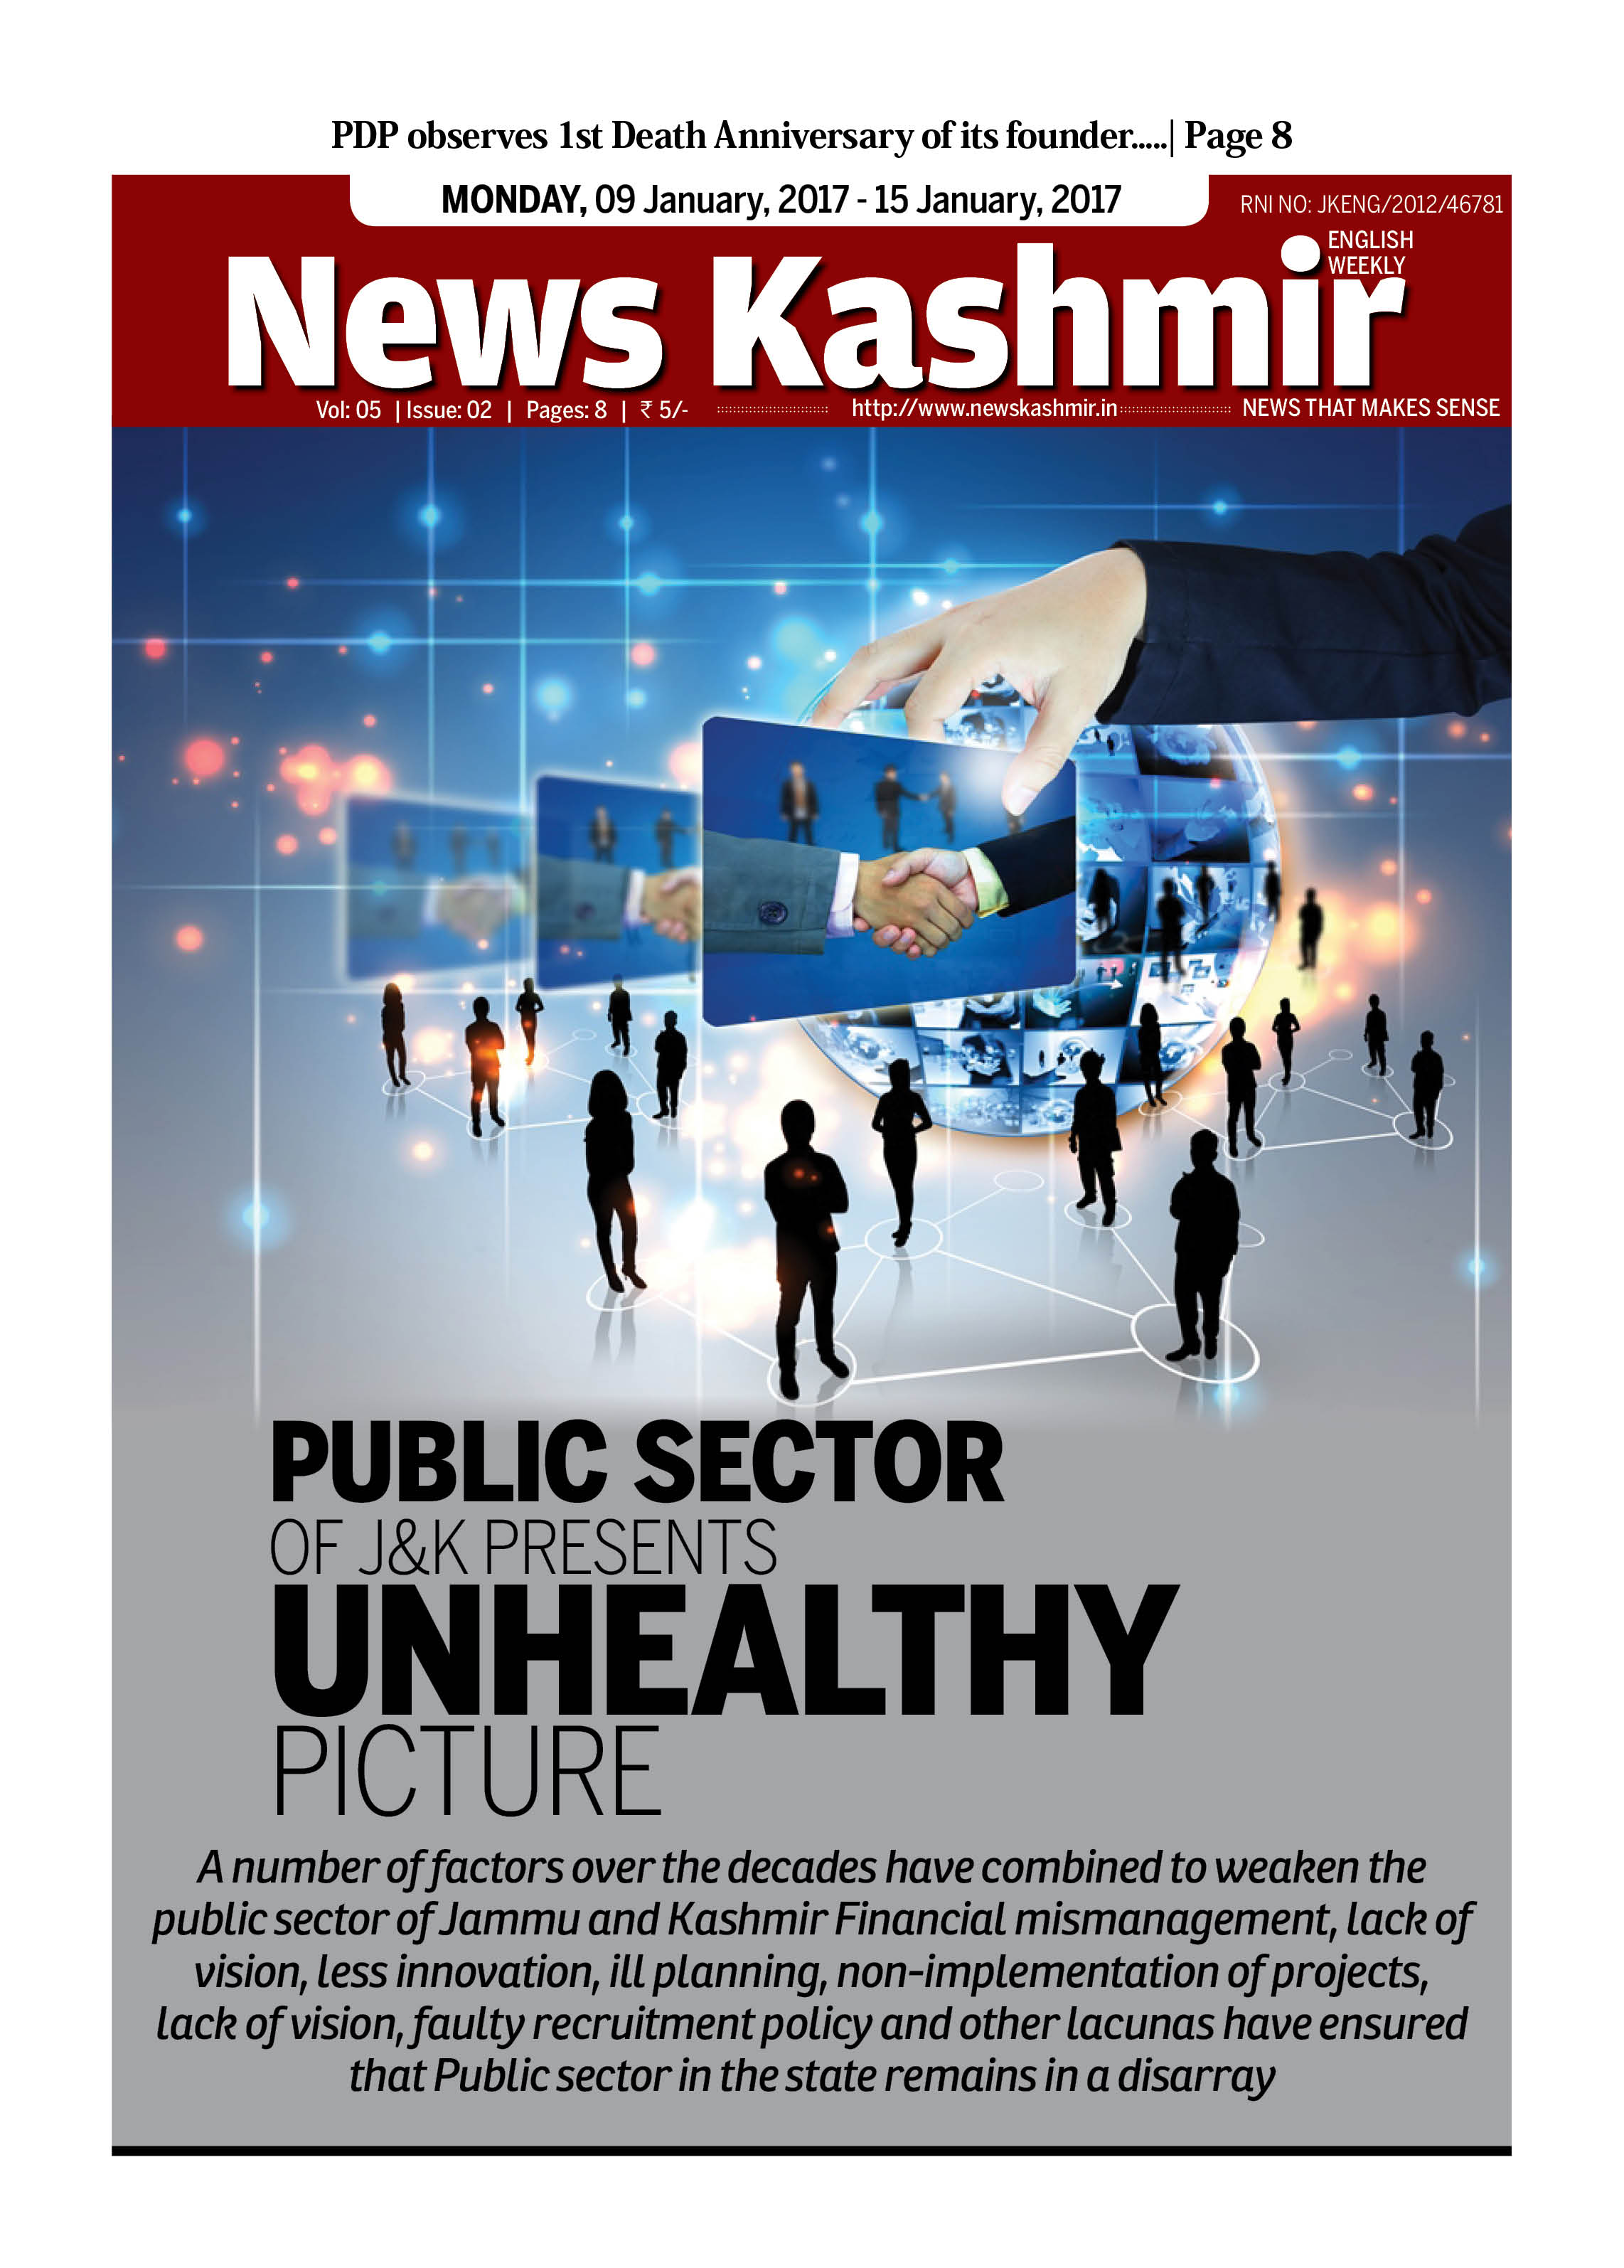 Public Sector of Jammu& Kashmir presents unhealthy picture